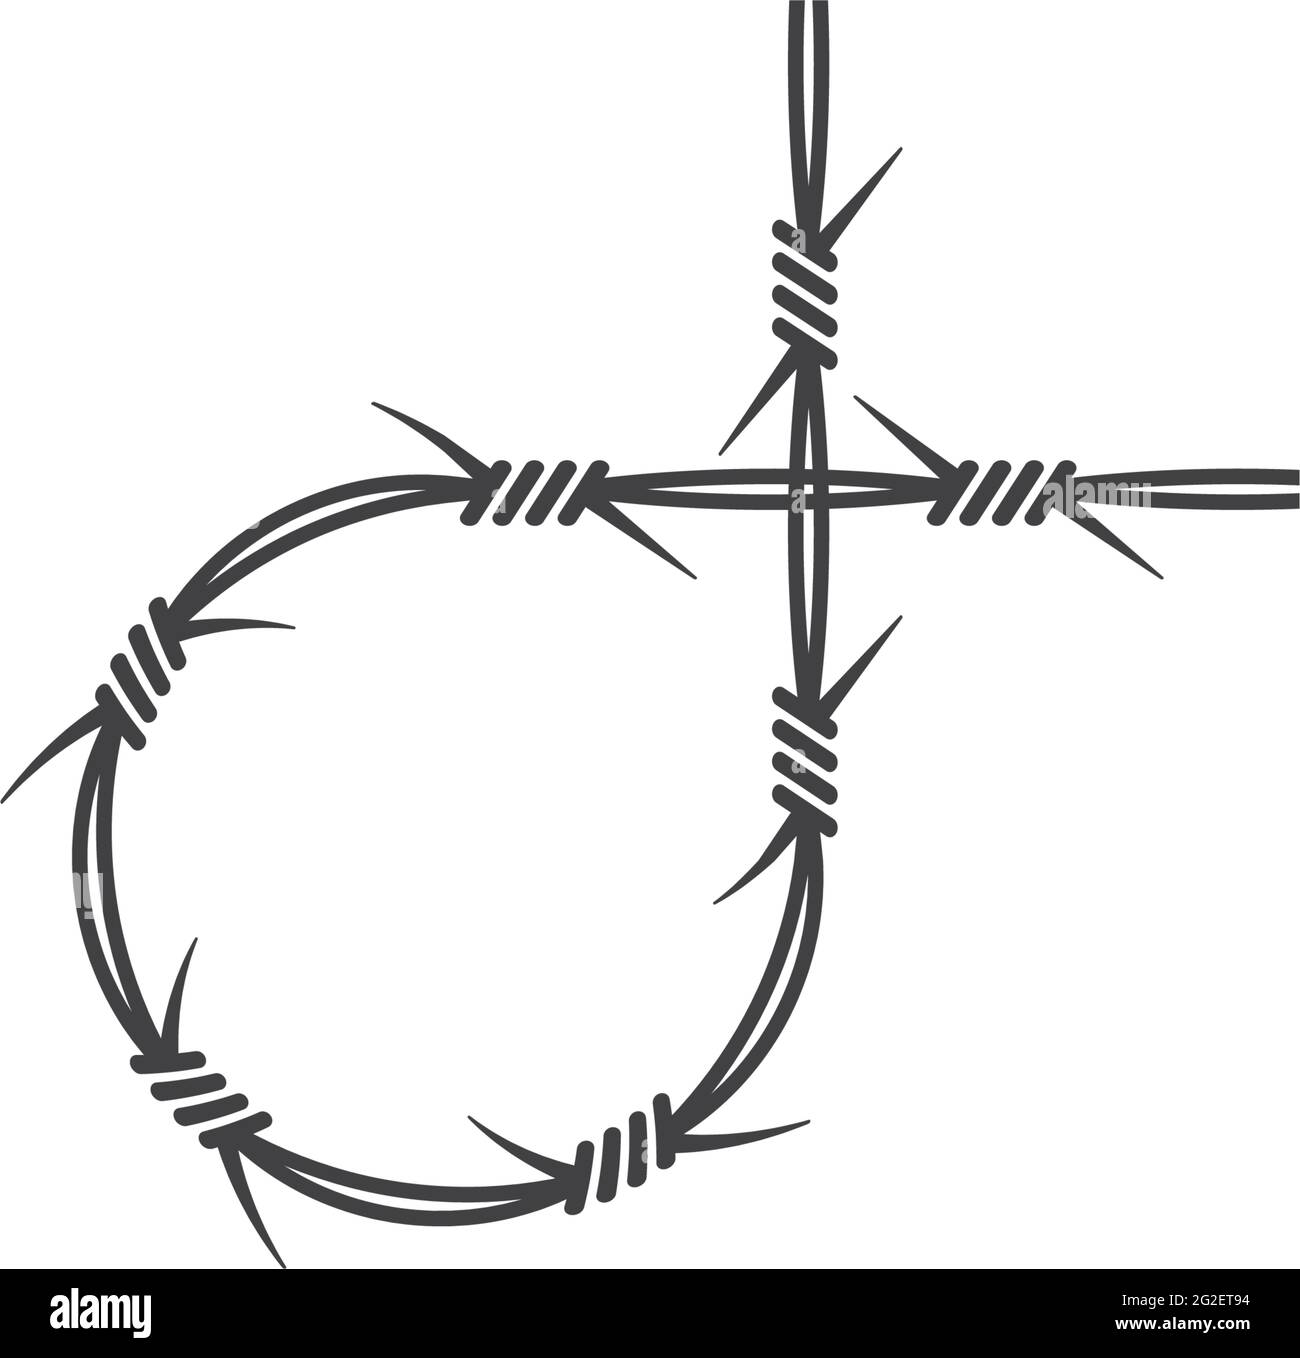 barbed wire vector illustration design template Stock Vector